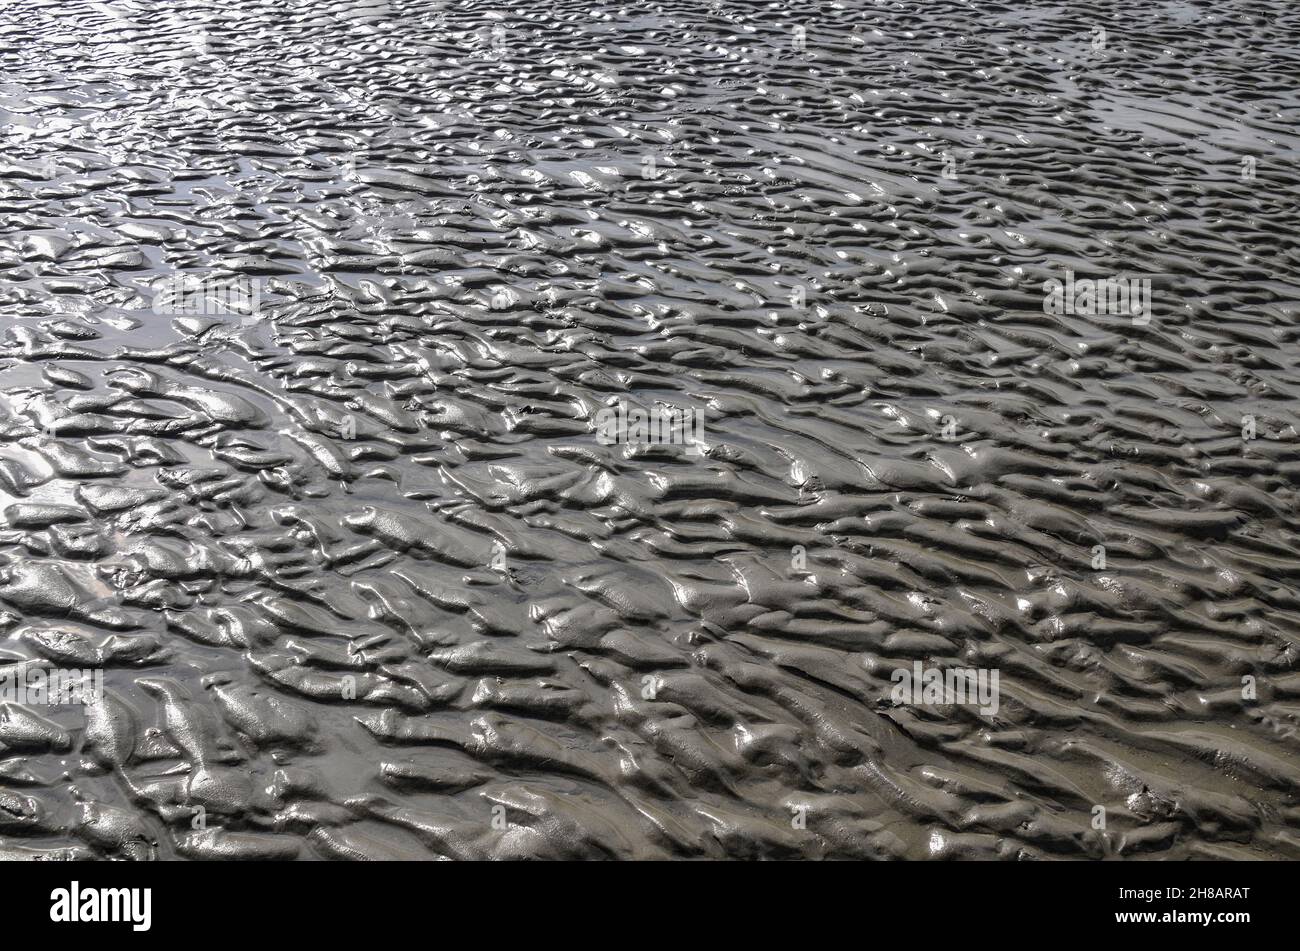 Natural pattern caused by off-flowing water during falling tide on a sandy ocean beach Stock Photo